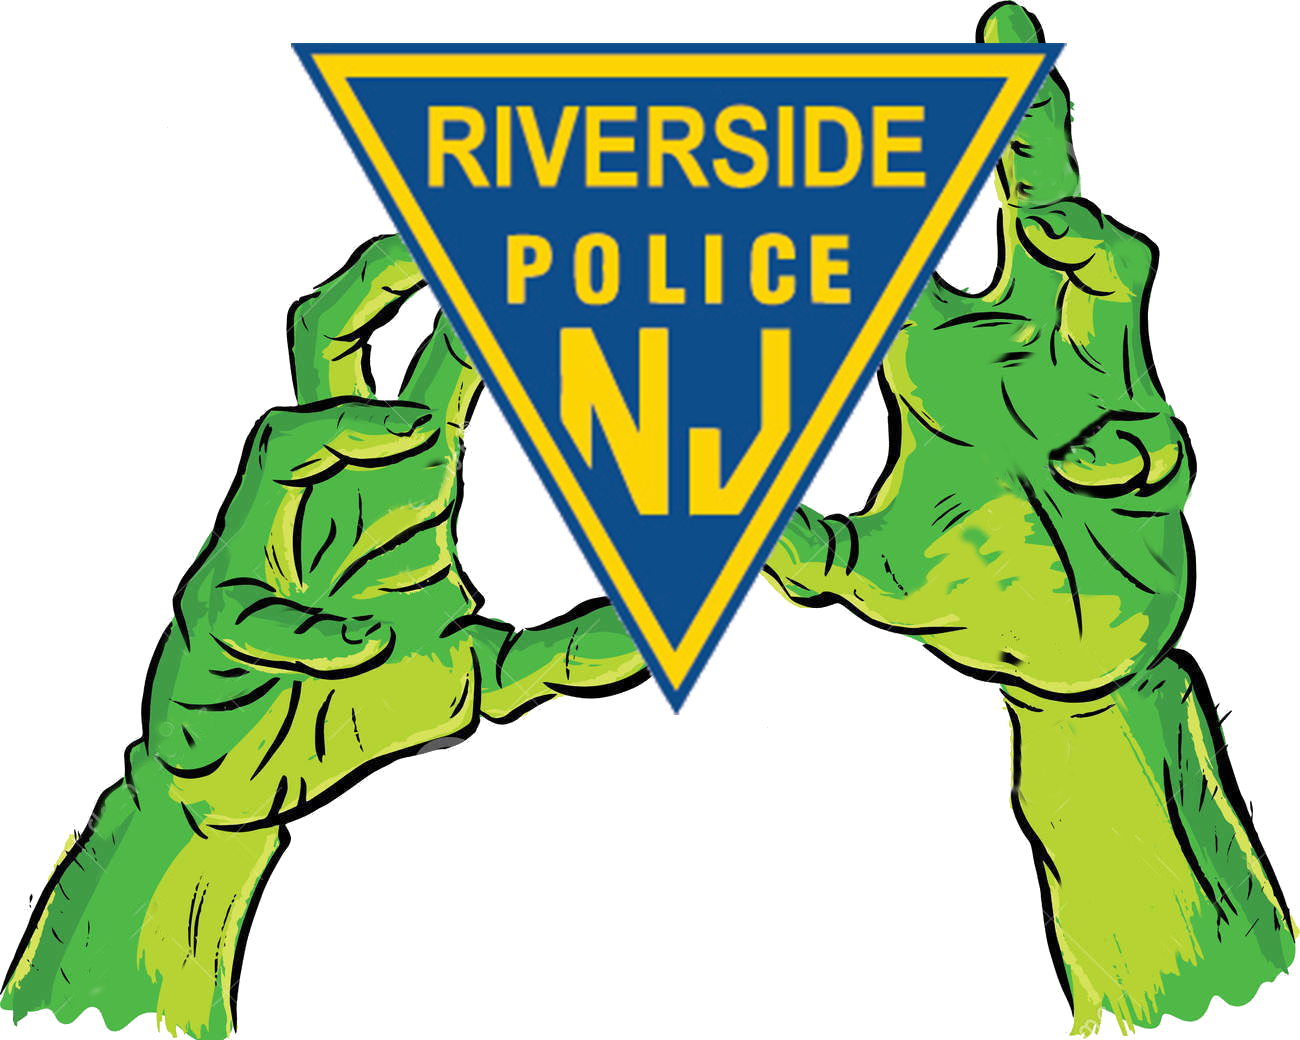 The Riverside Police Officers Association And Riverside - New Jersey State Police (1300x1040)